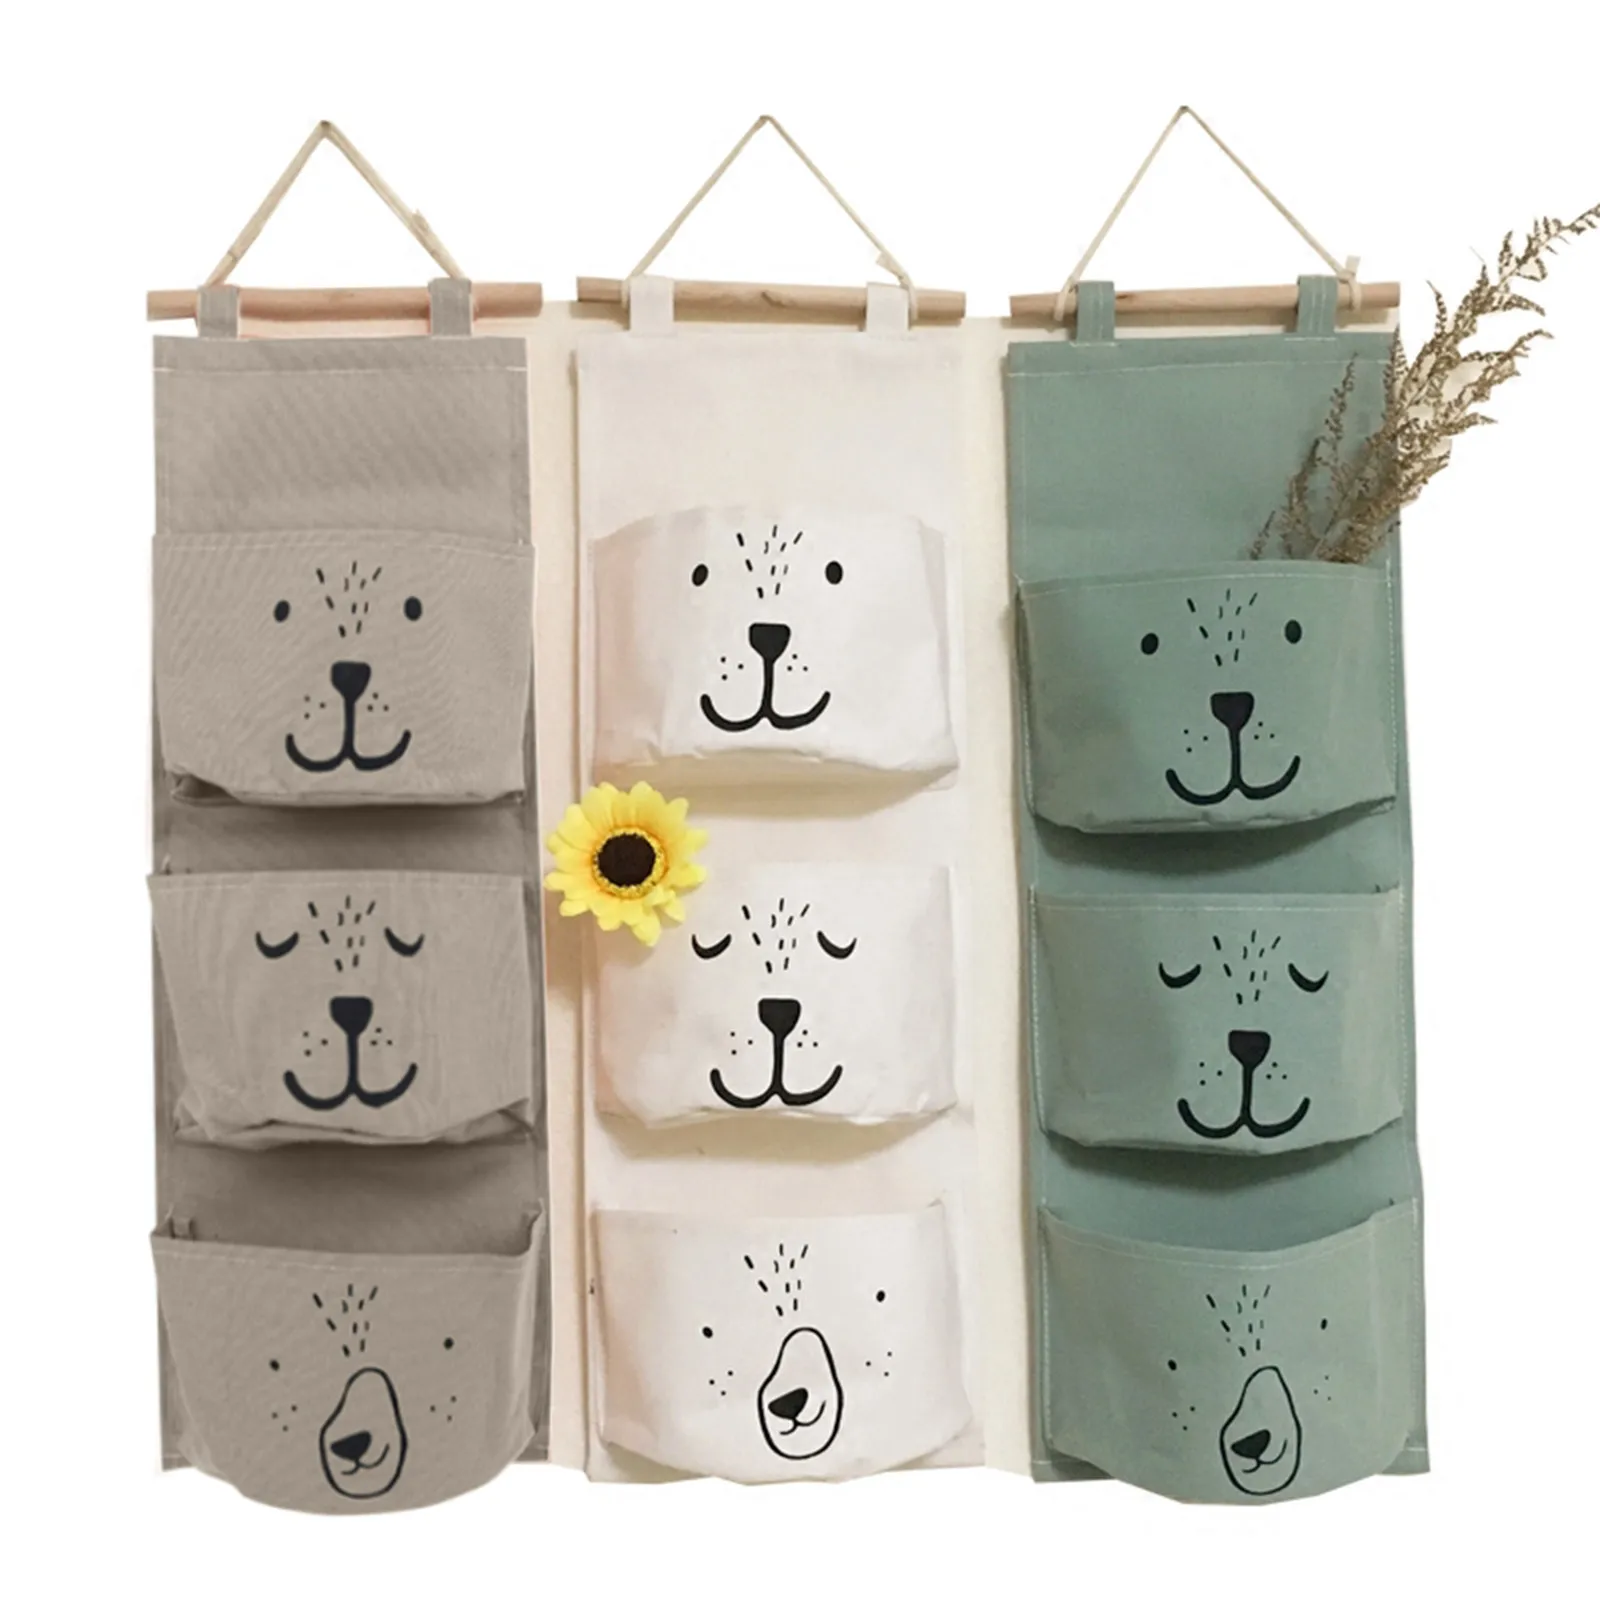 Details about   Cotton Linen Multi Pocket Hanging Bag 3 Pockets Wall Mounted Hanging Storage  QW 